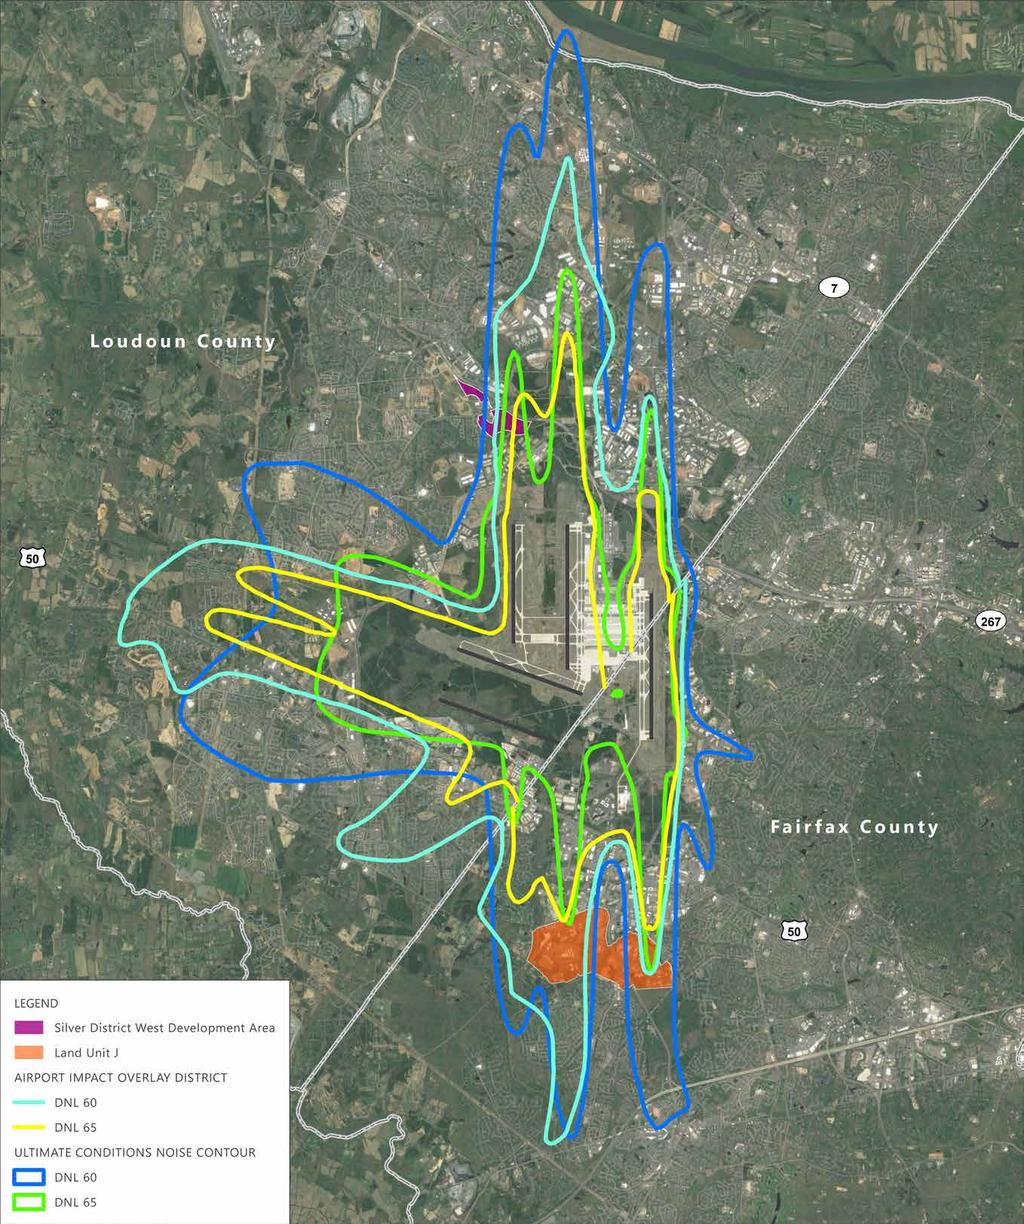 Ultimate Conditions Noise Contours with Existing Airport Noise Impact Overlay Districts Arrival Flight Paths Departure Flight Paths SOURCES: Esri, HERE, DeLorme, MapmyIndia, OpenStreetMap